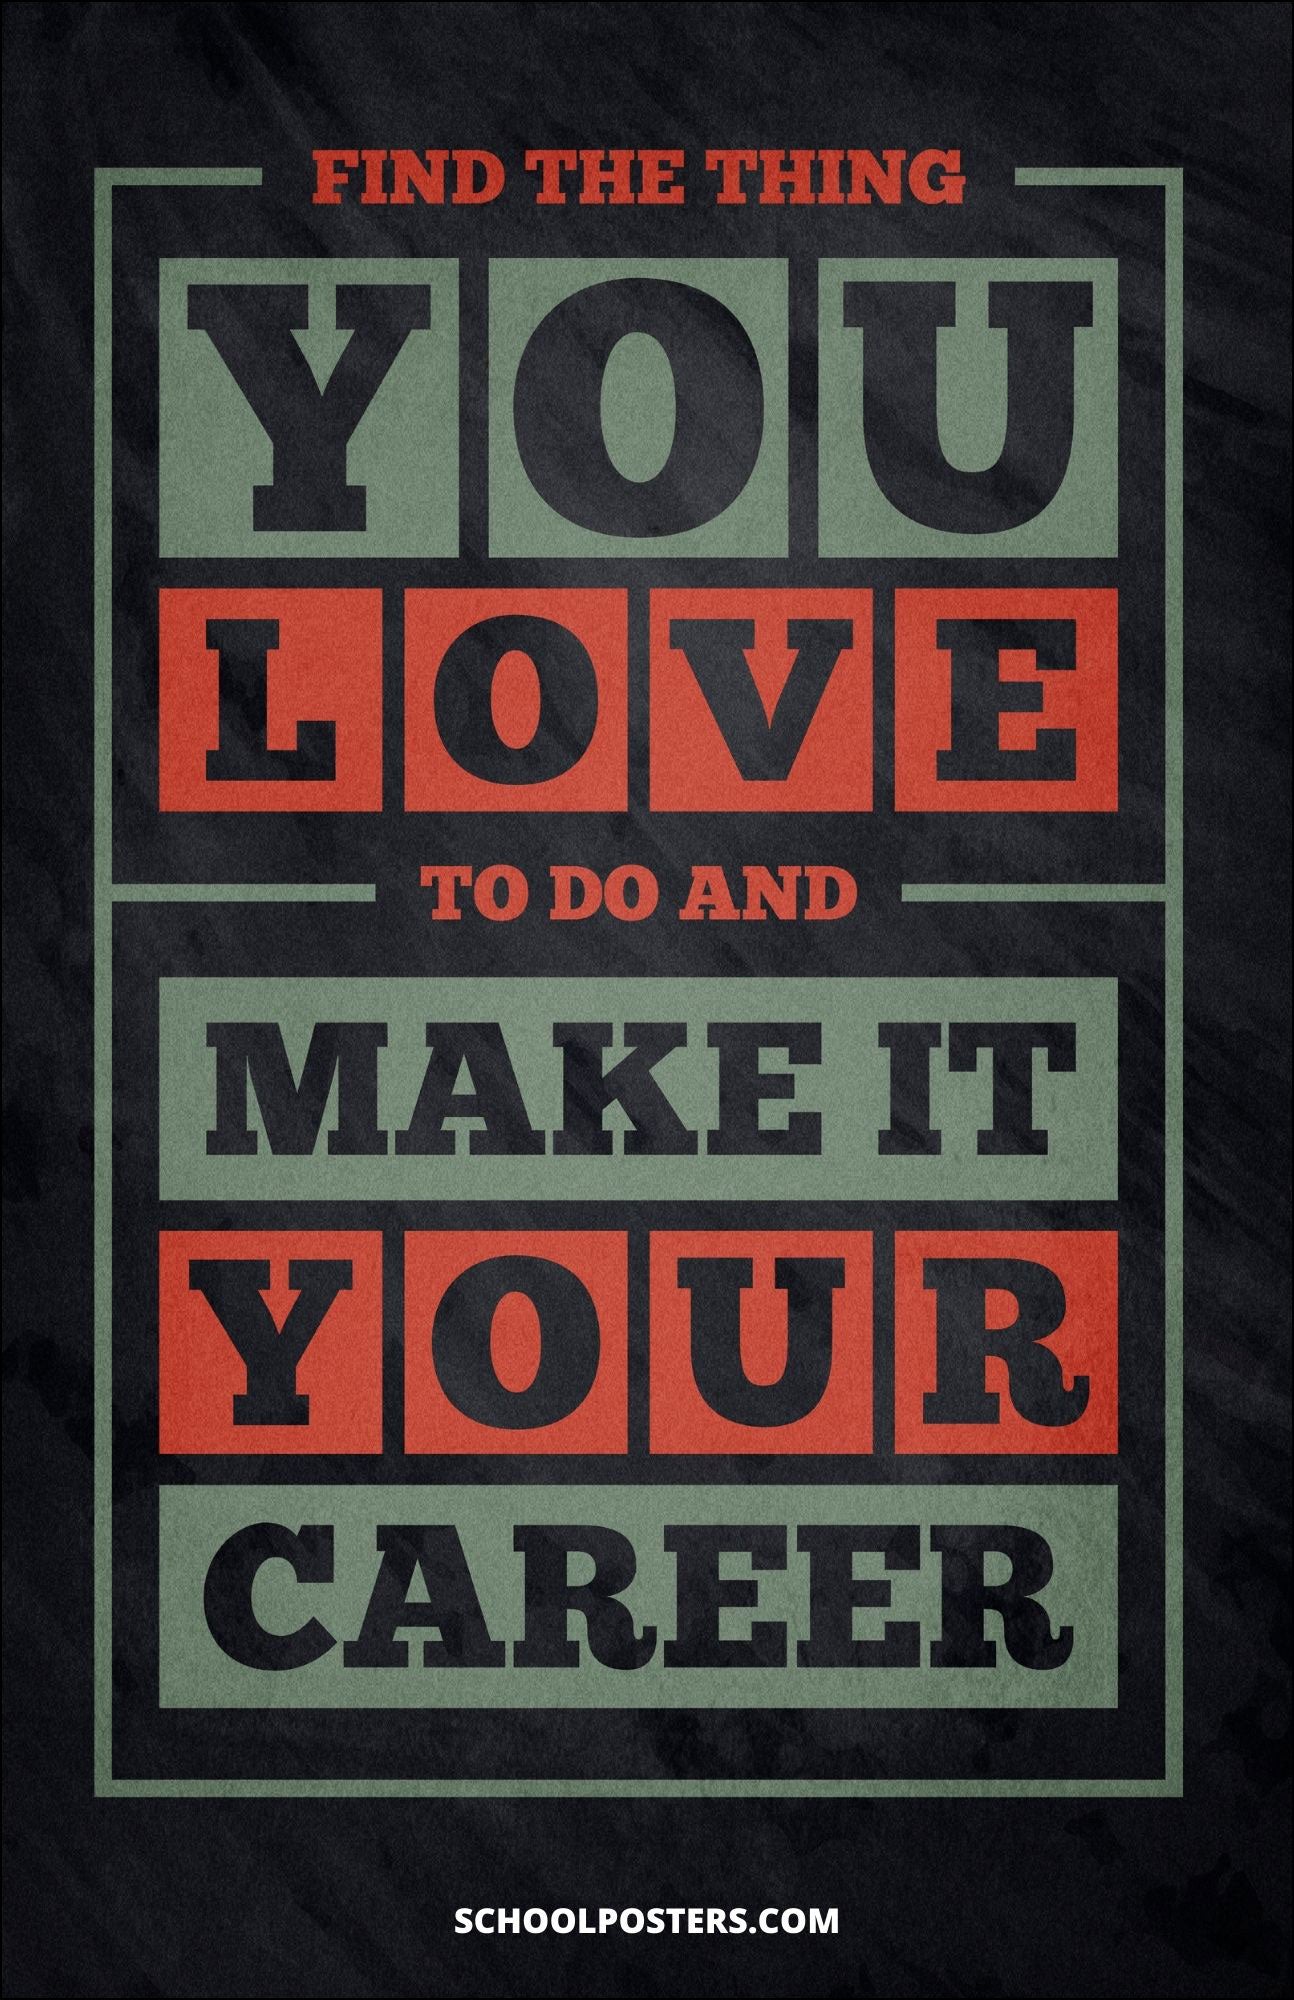 Make It Your Career Poster